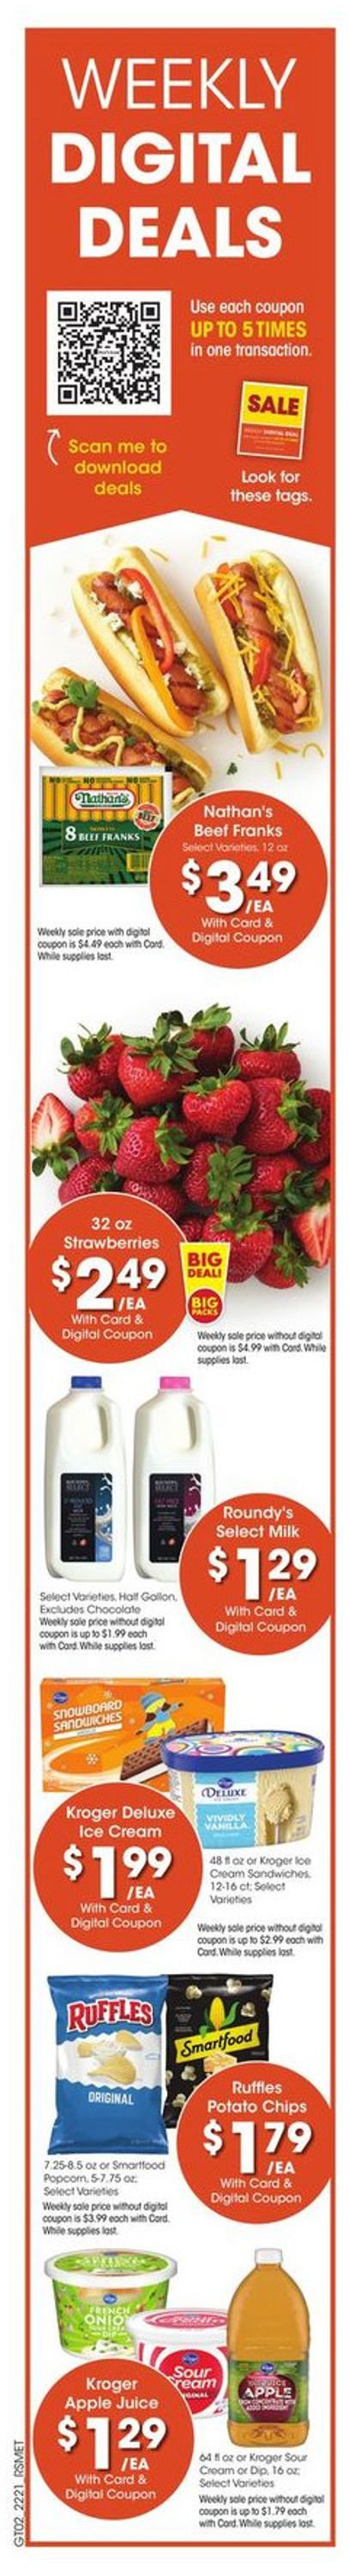 Catalogue Pick ‘n Save from 06/22/2022